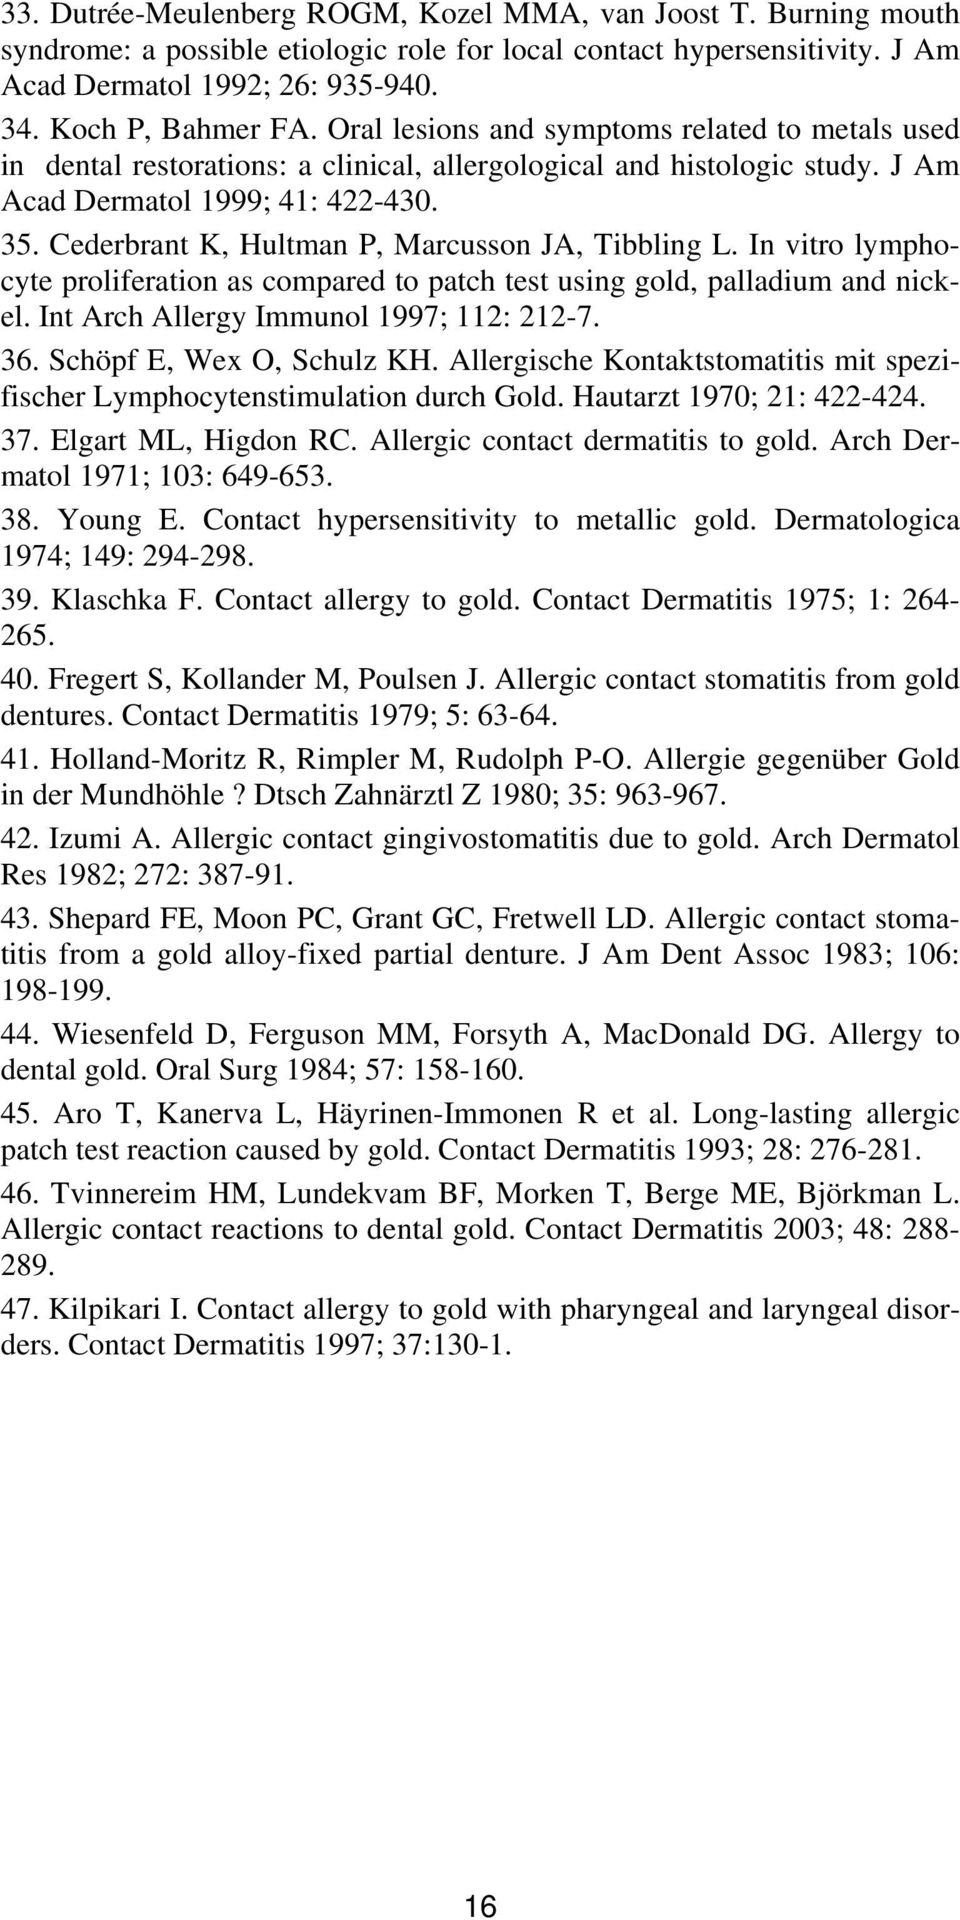 Cederbrant K, Hultman P, Marcusson JA, Tibbling L. In vitro lymphocyte proliferation as compared to patch test using gold, palladium and nickel. Int Arch Allergy Immunol 1997; 112: 212-7. 36.